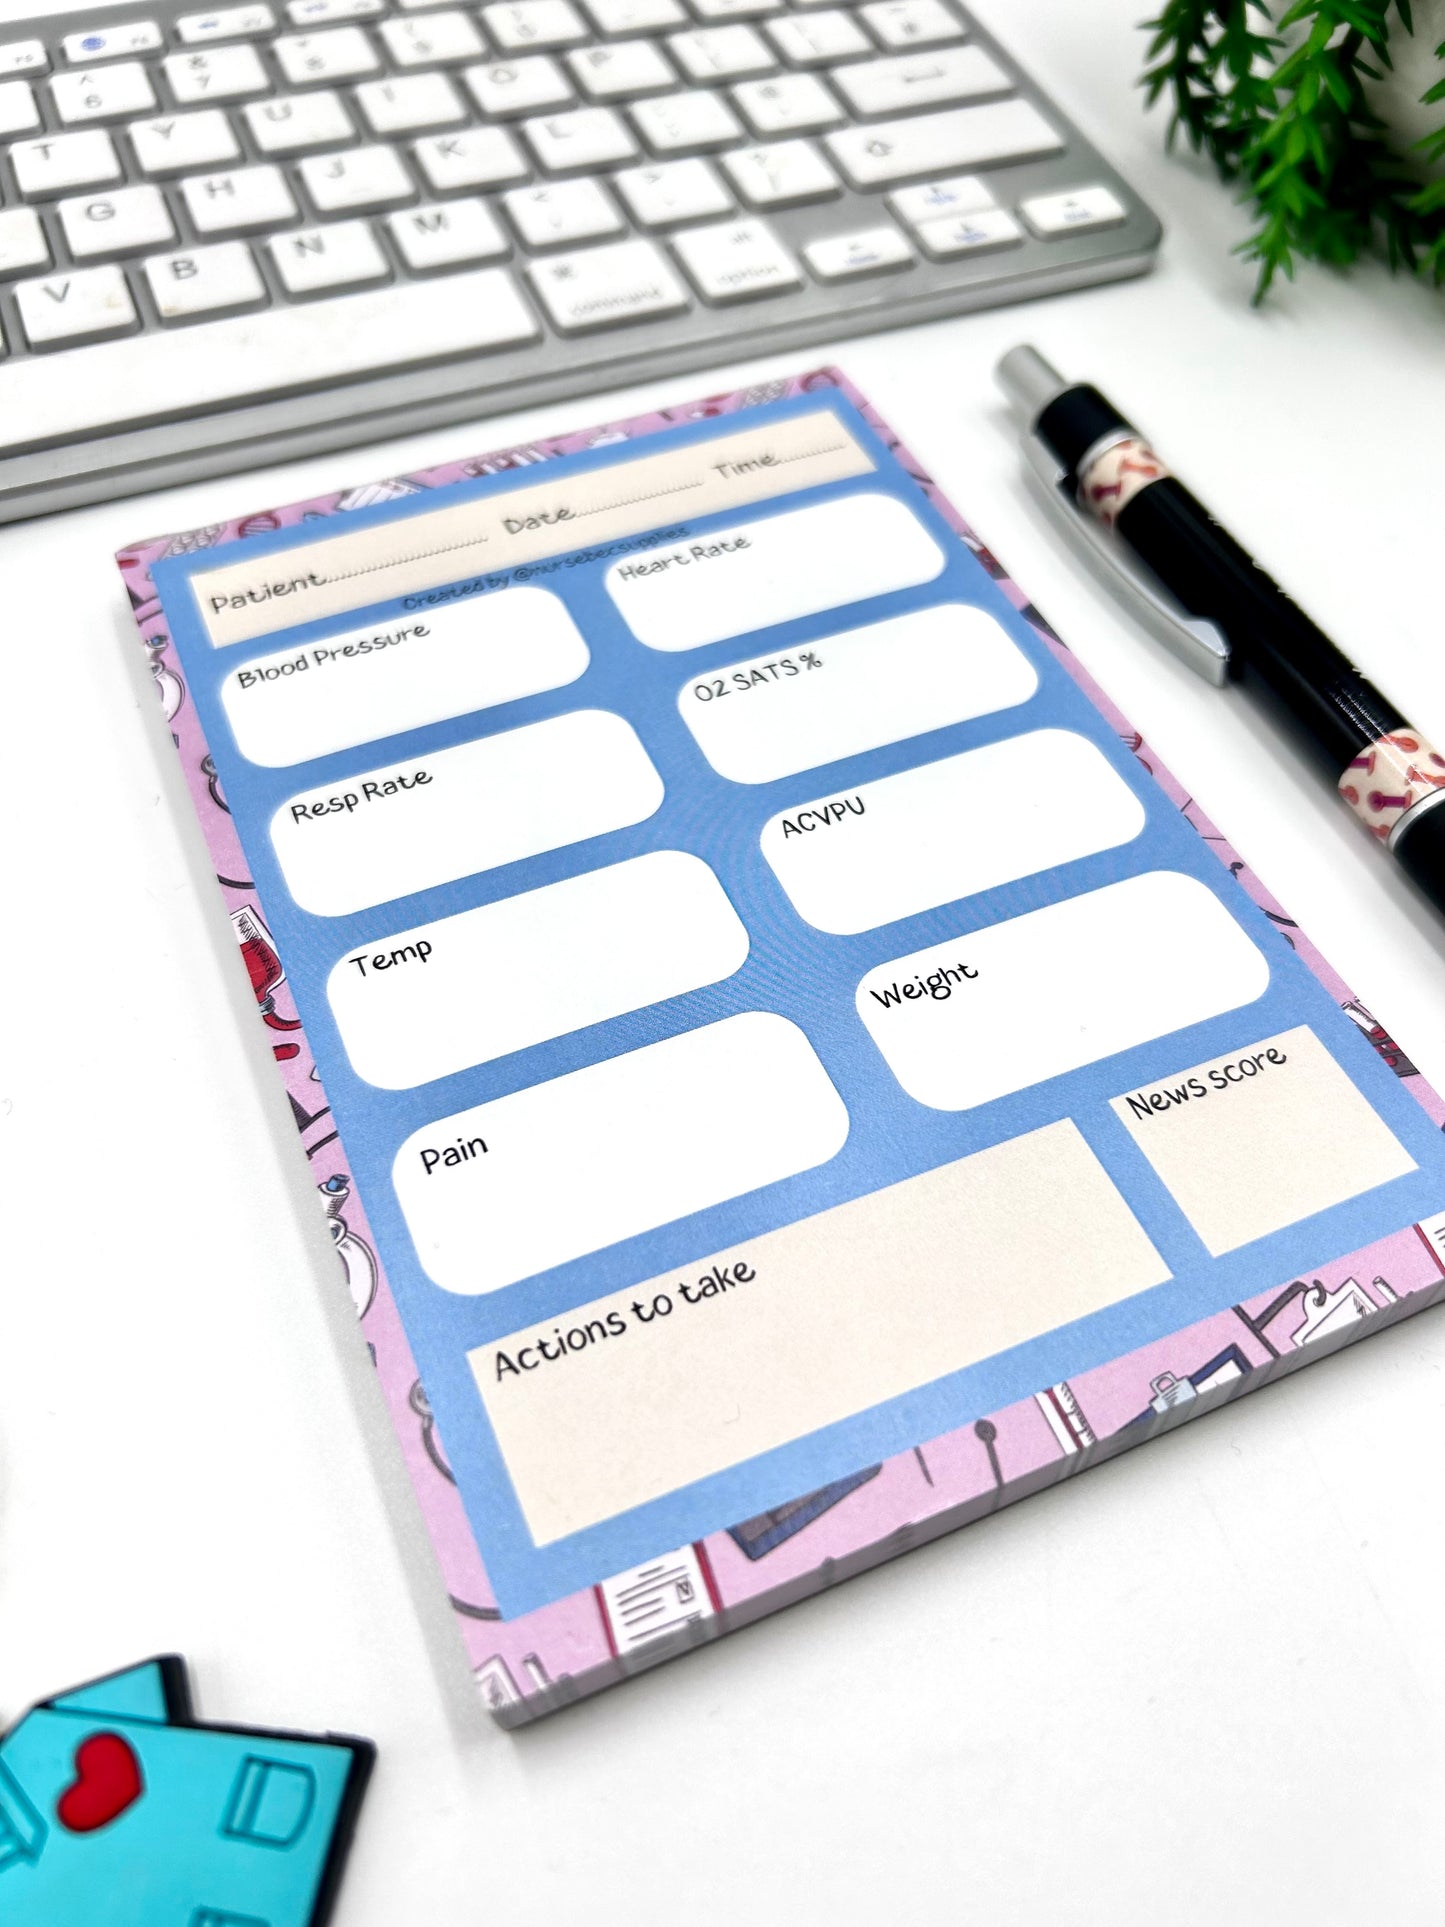 Observations note pad